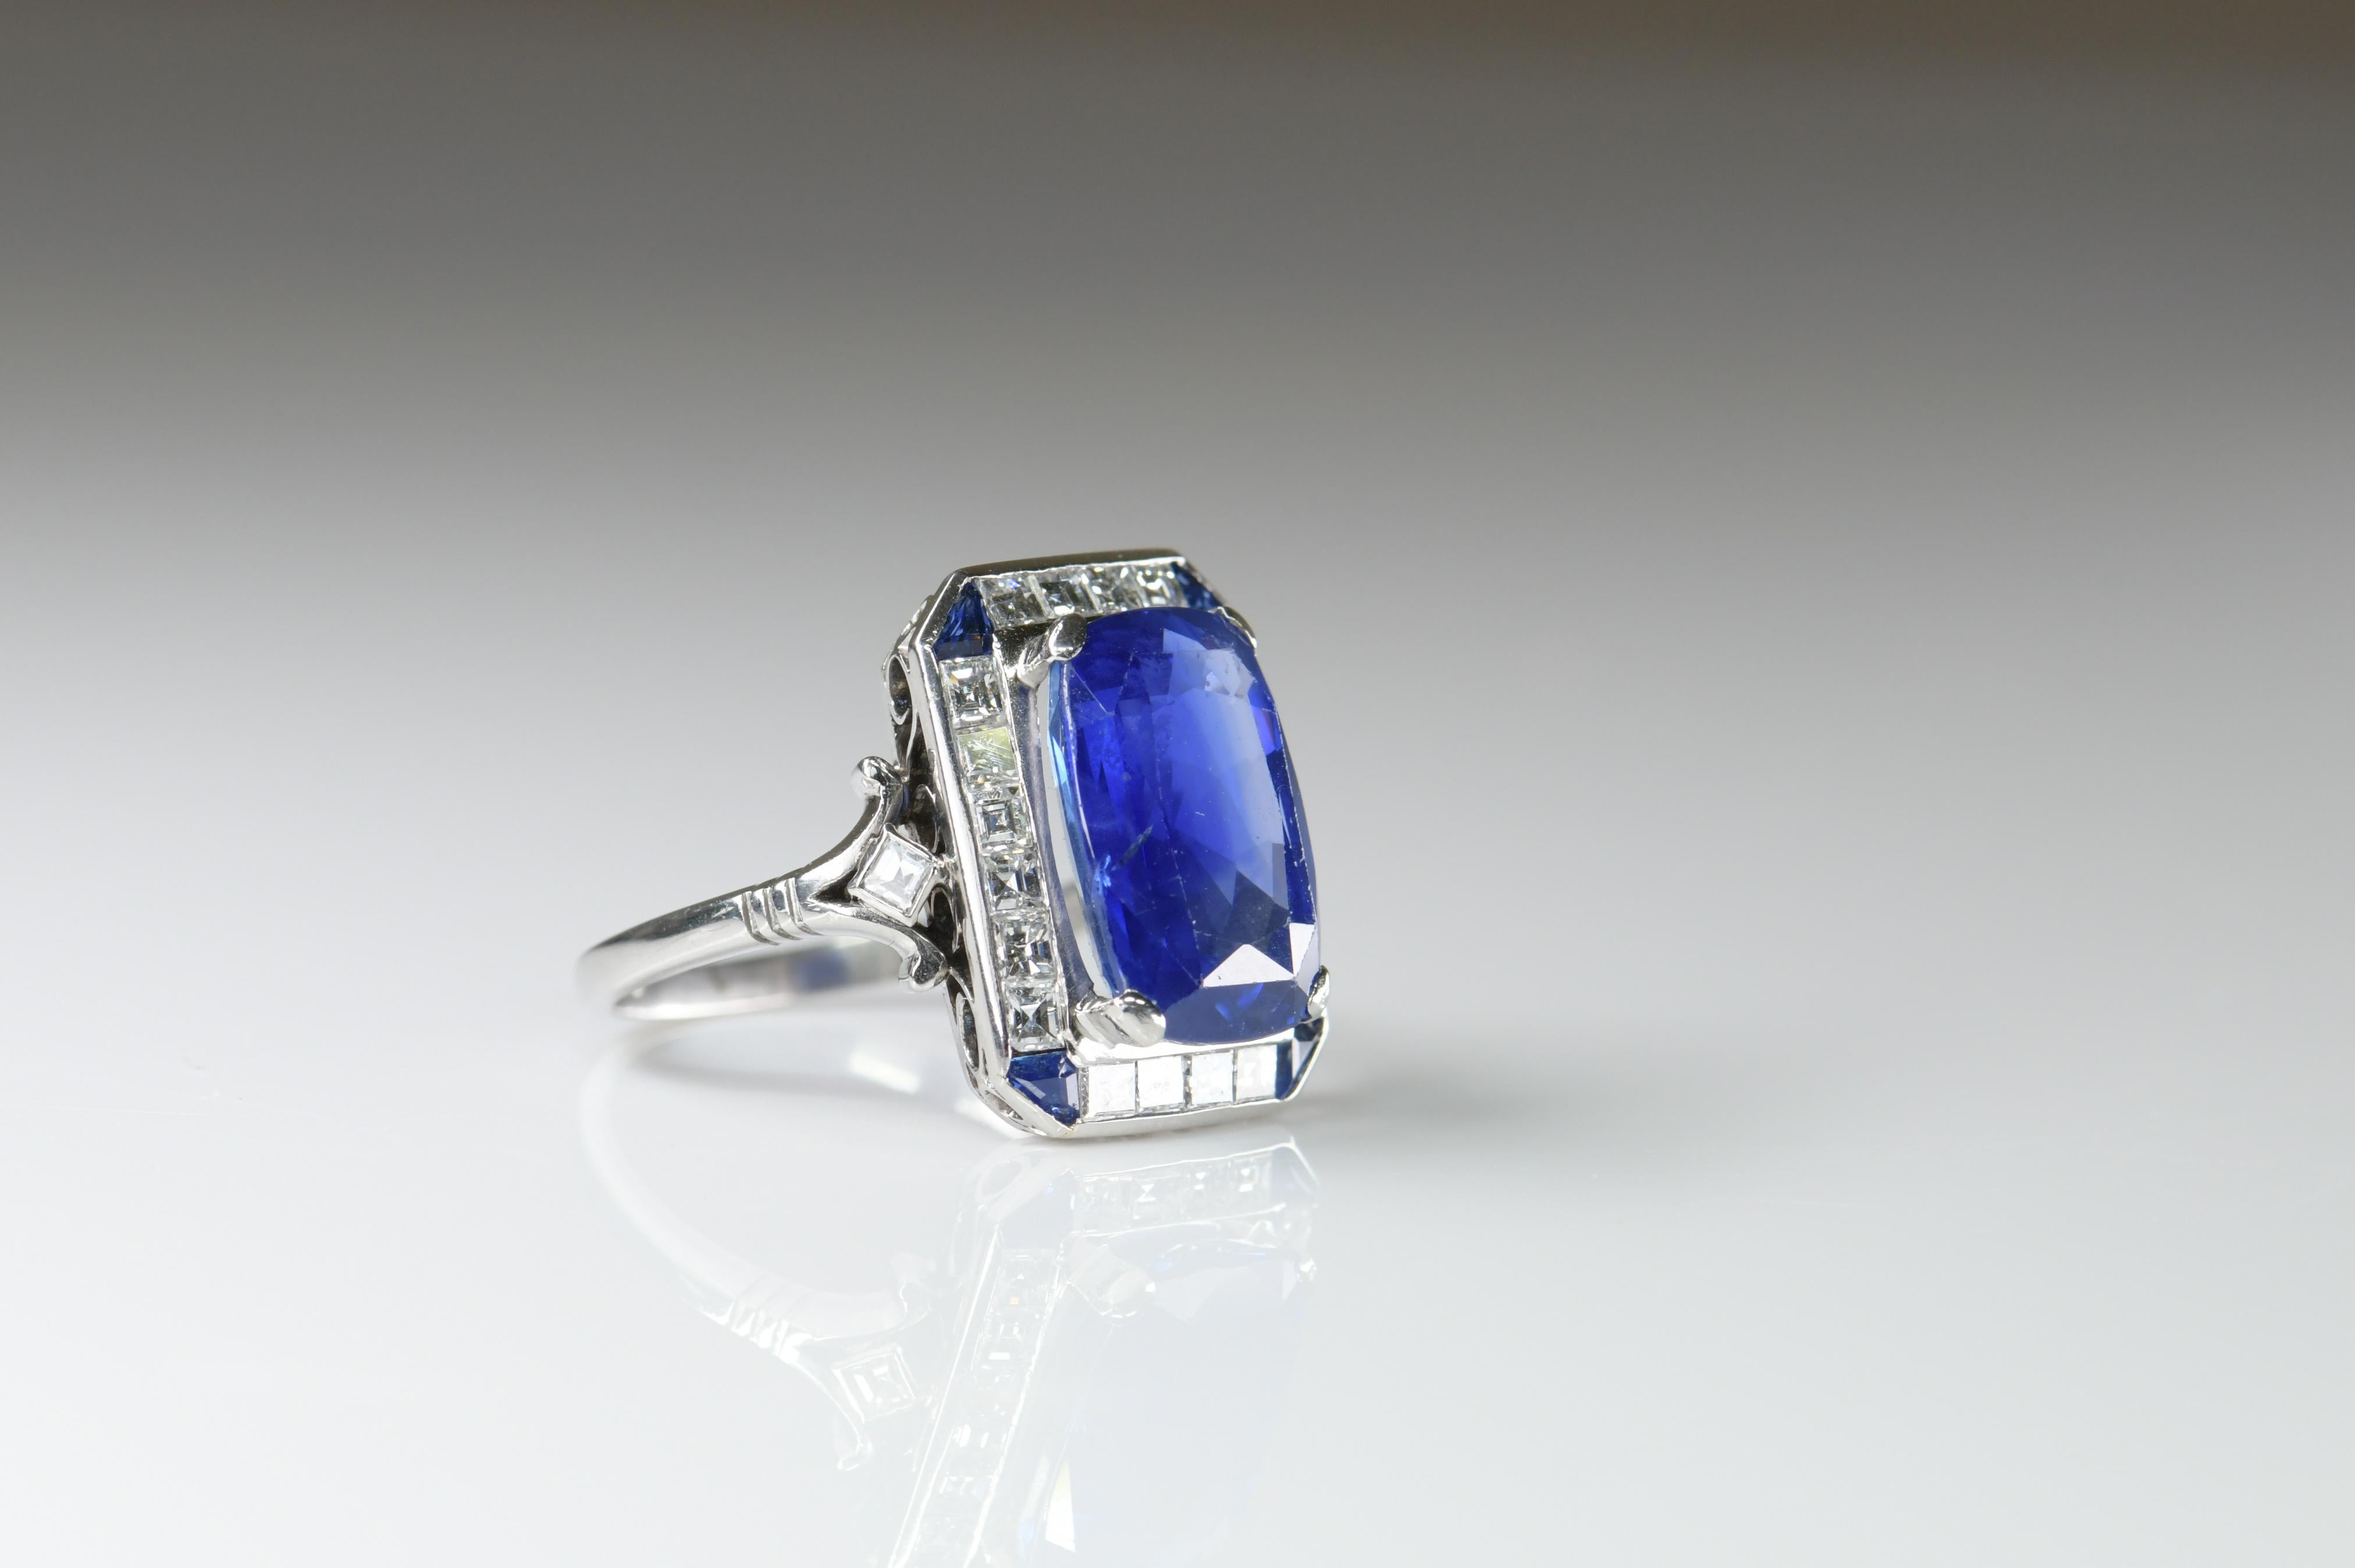 This is a stunning platinum ring that was made in the 1910s. It has been set with a beautiful 8.52arat no heat gem-quality Ceylon sapphire with Gem And Pearl Lab certification.

The elegant cushion-cut sapphire surround by 12 sparkling baguette-cut